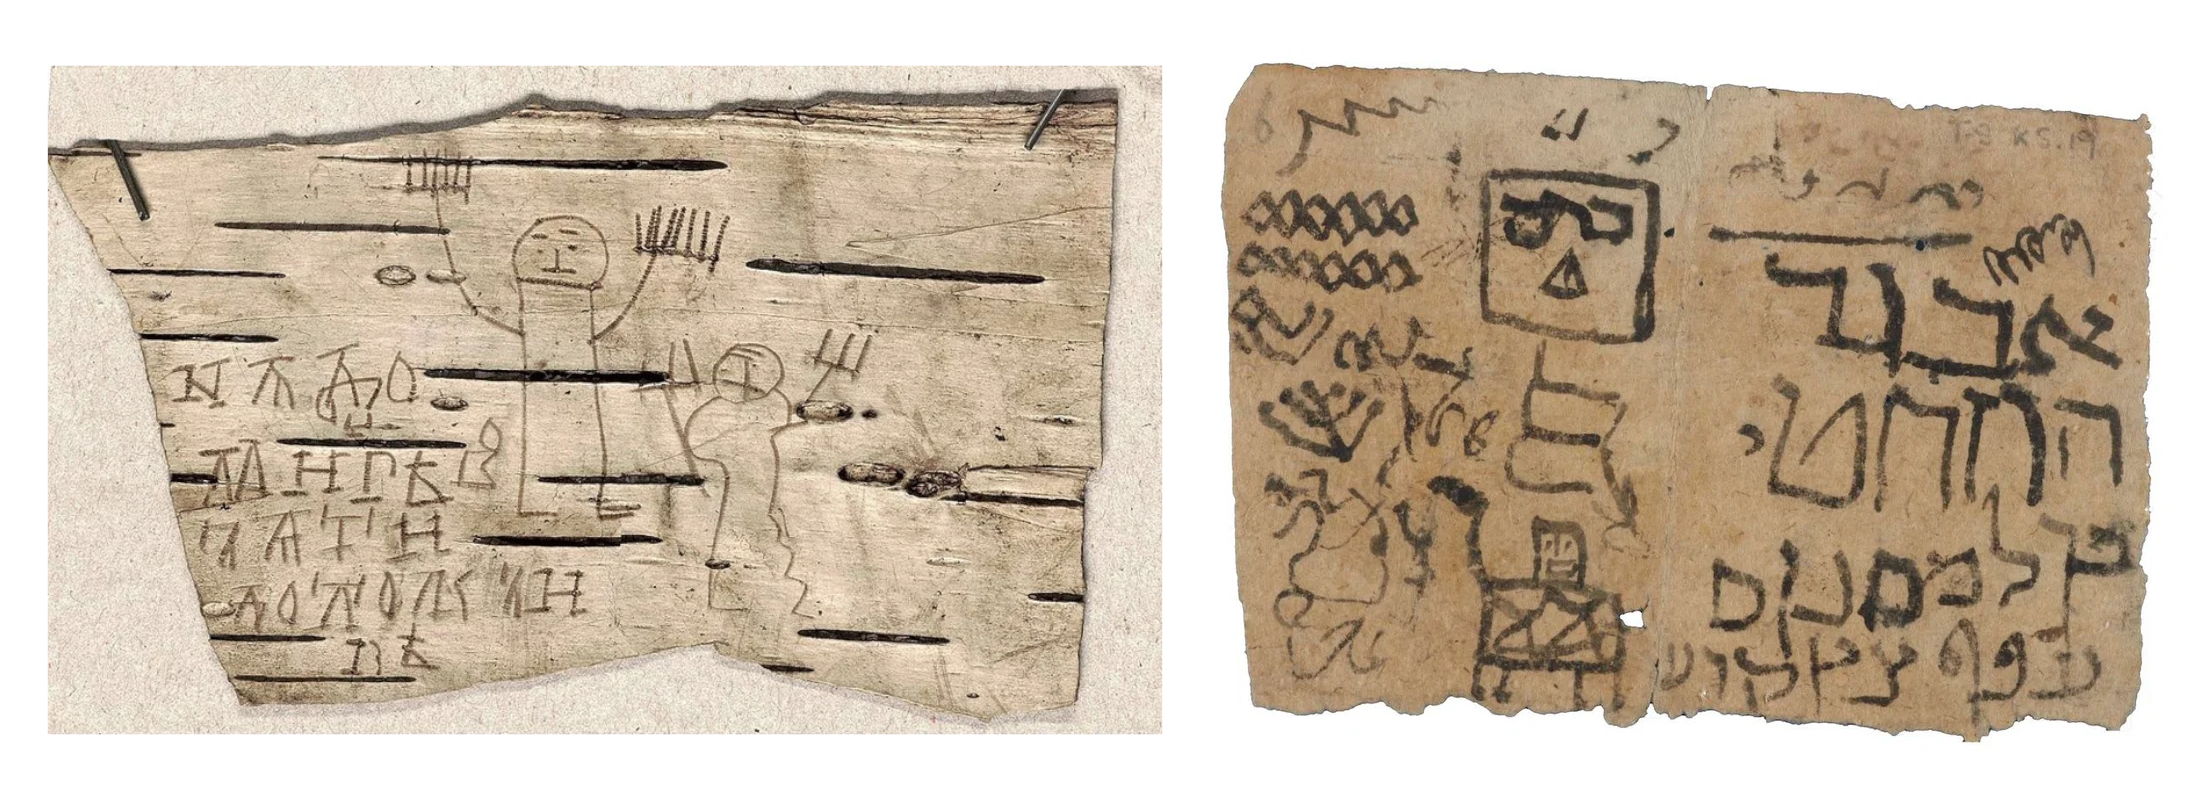 Children learning how to write. Left - a 7 year old boy called Onfim from Novgorod, 13th century Russia; Right - a child learning Hebrew, from Egypt, 1000 years ago.png